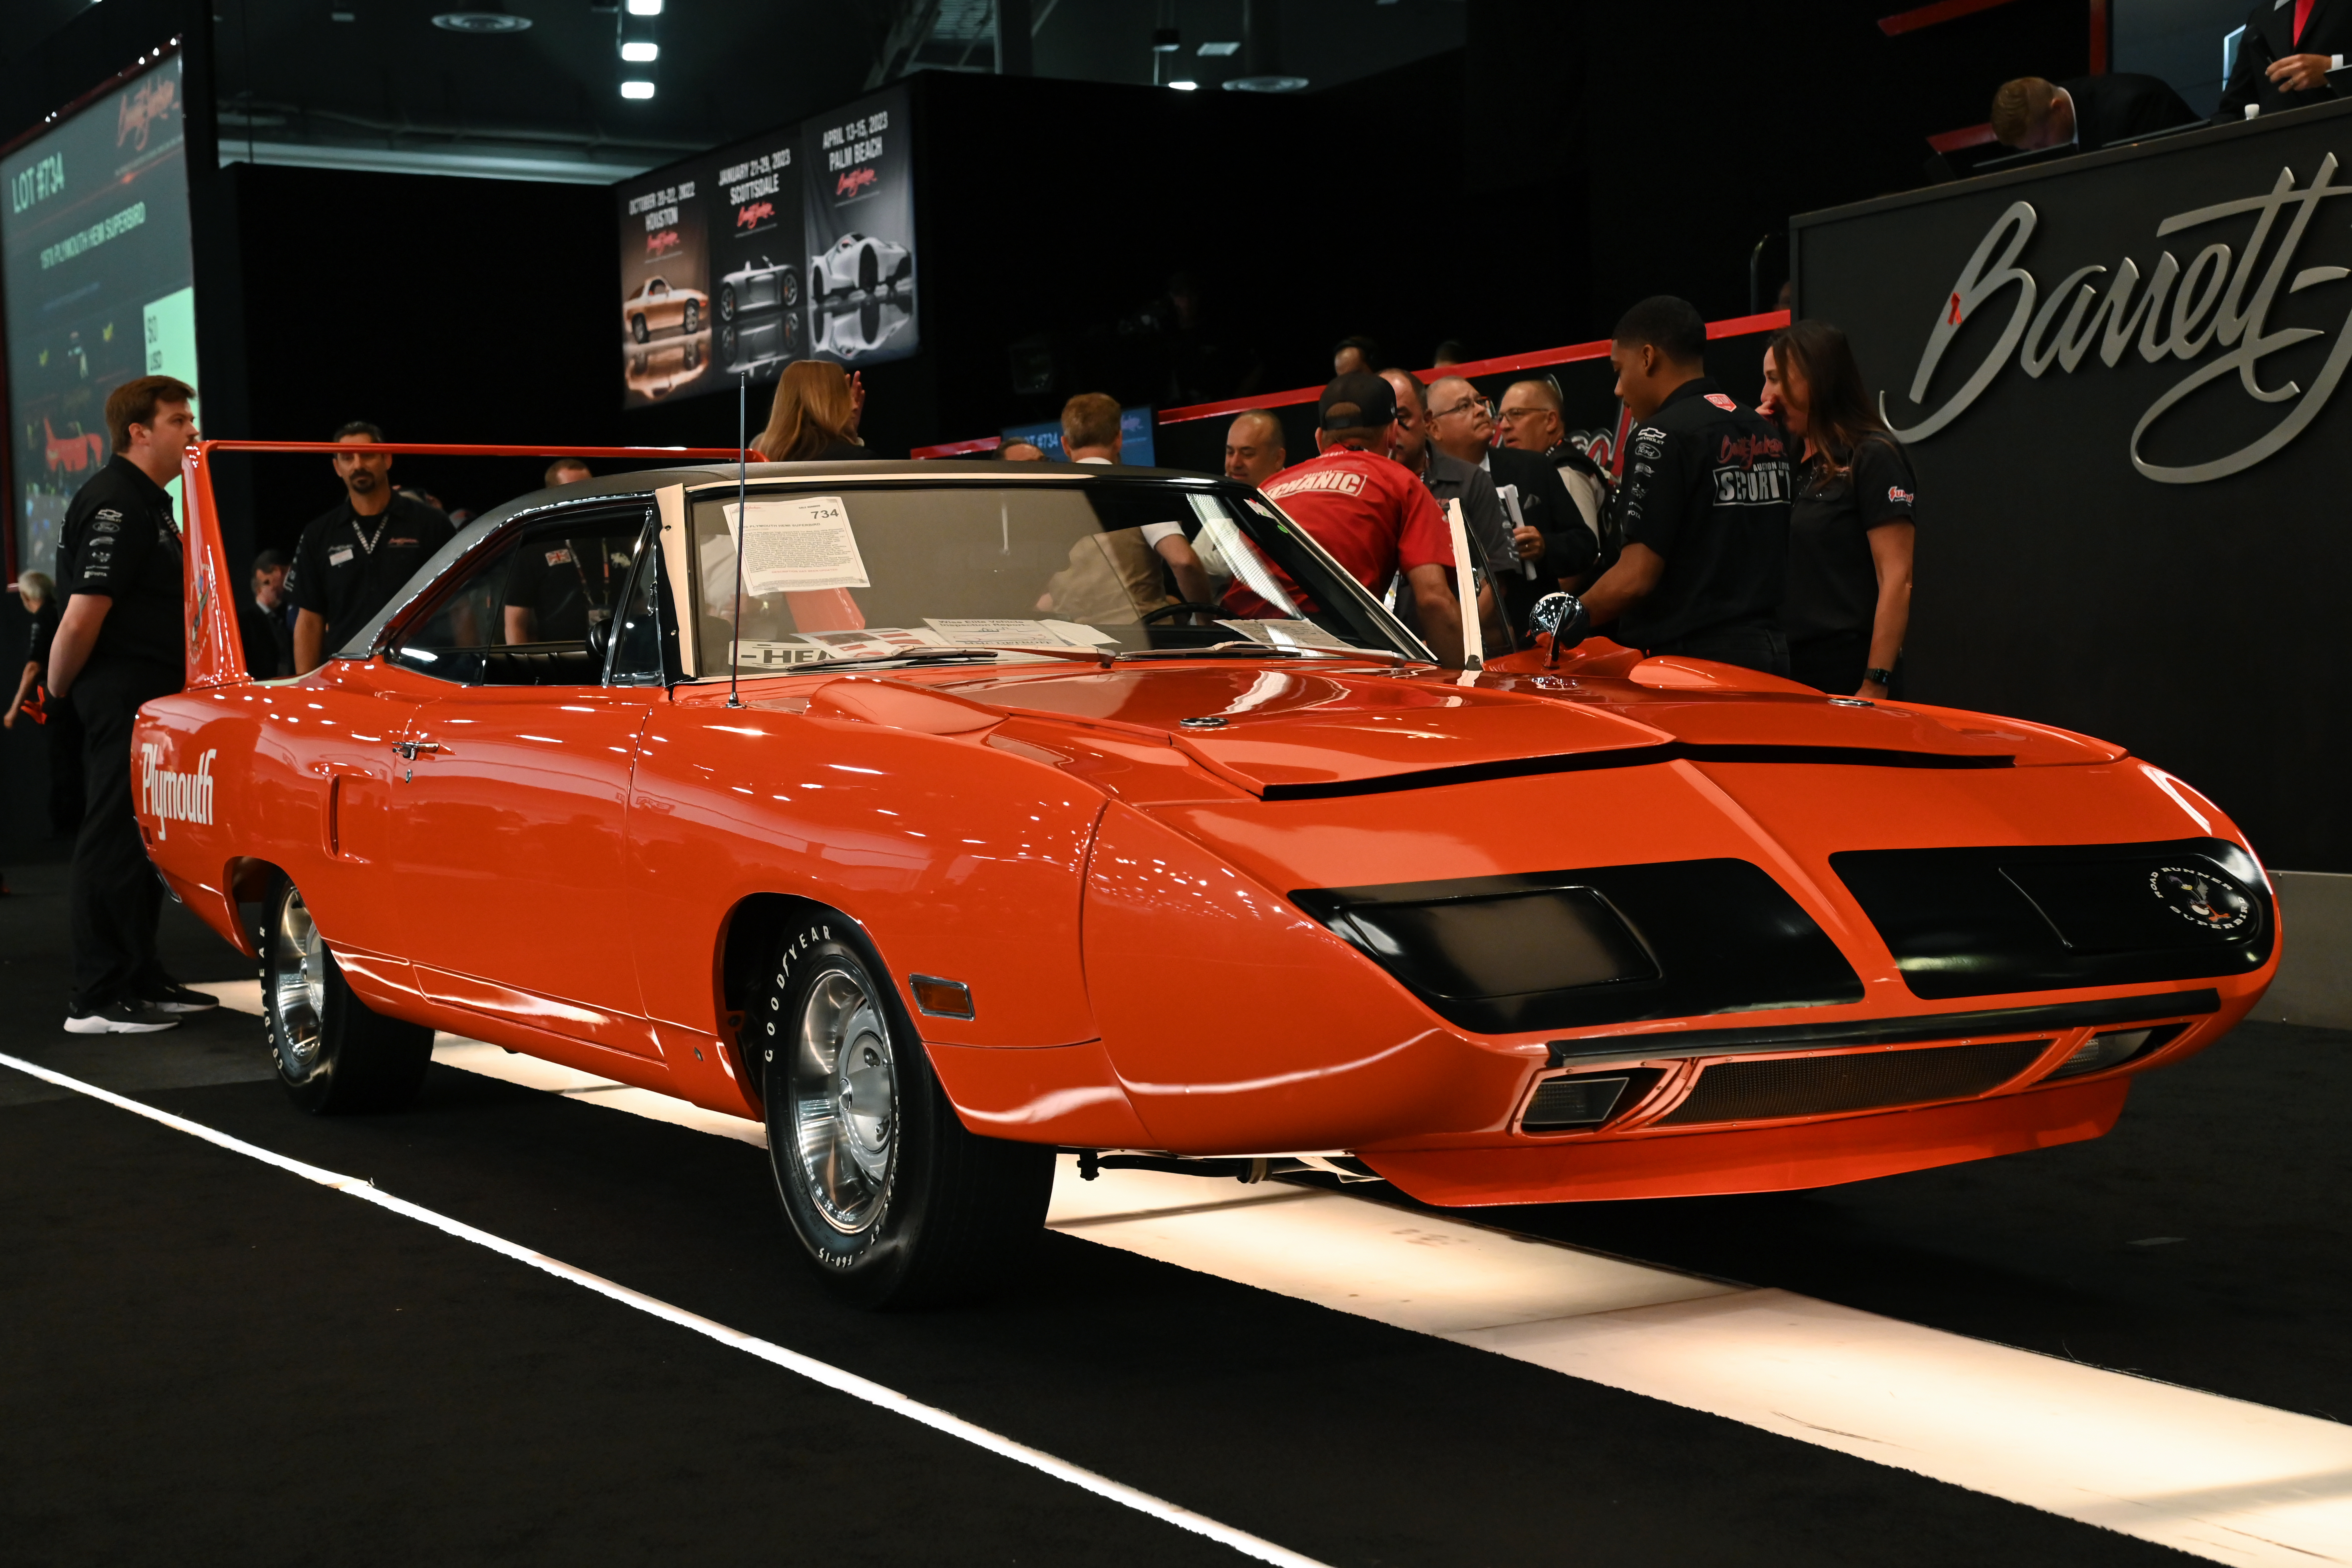 Barrett-Jackson Celebrates Fourth of July Weekend With More Than $49.1 Million in Sales at 2022 Las Vegas Auction, Including World Record $1.65 Million 1970 HEMI Superbird Business Wire